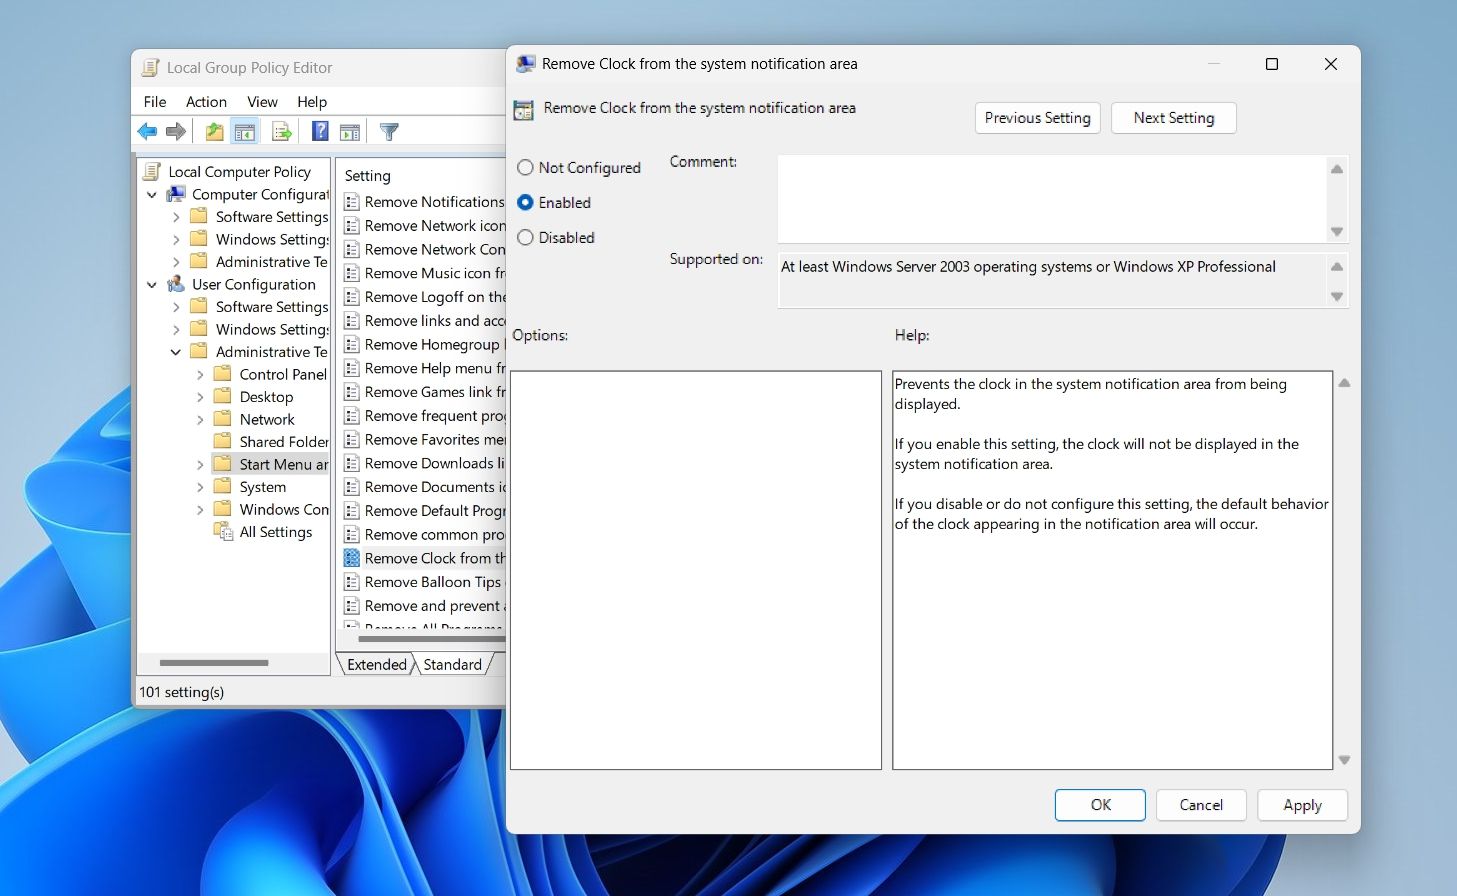 Disabling Clock and Date using the local group policy editor